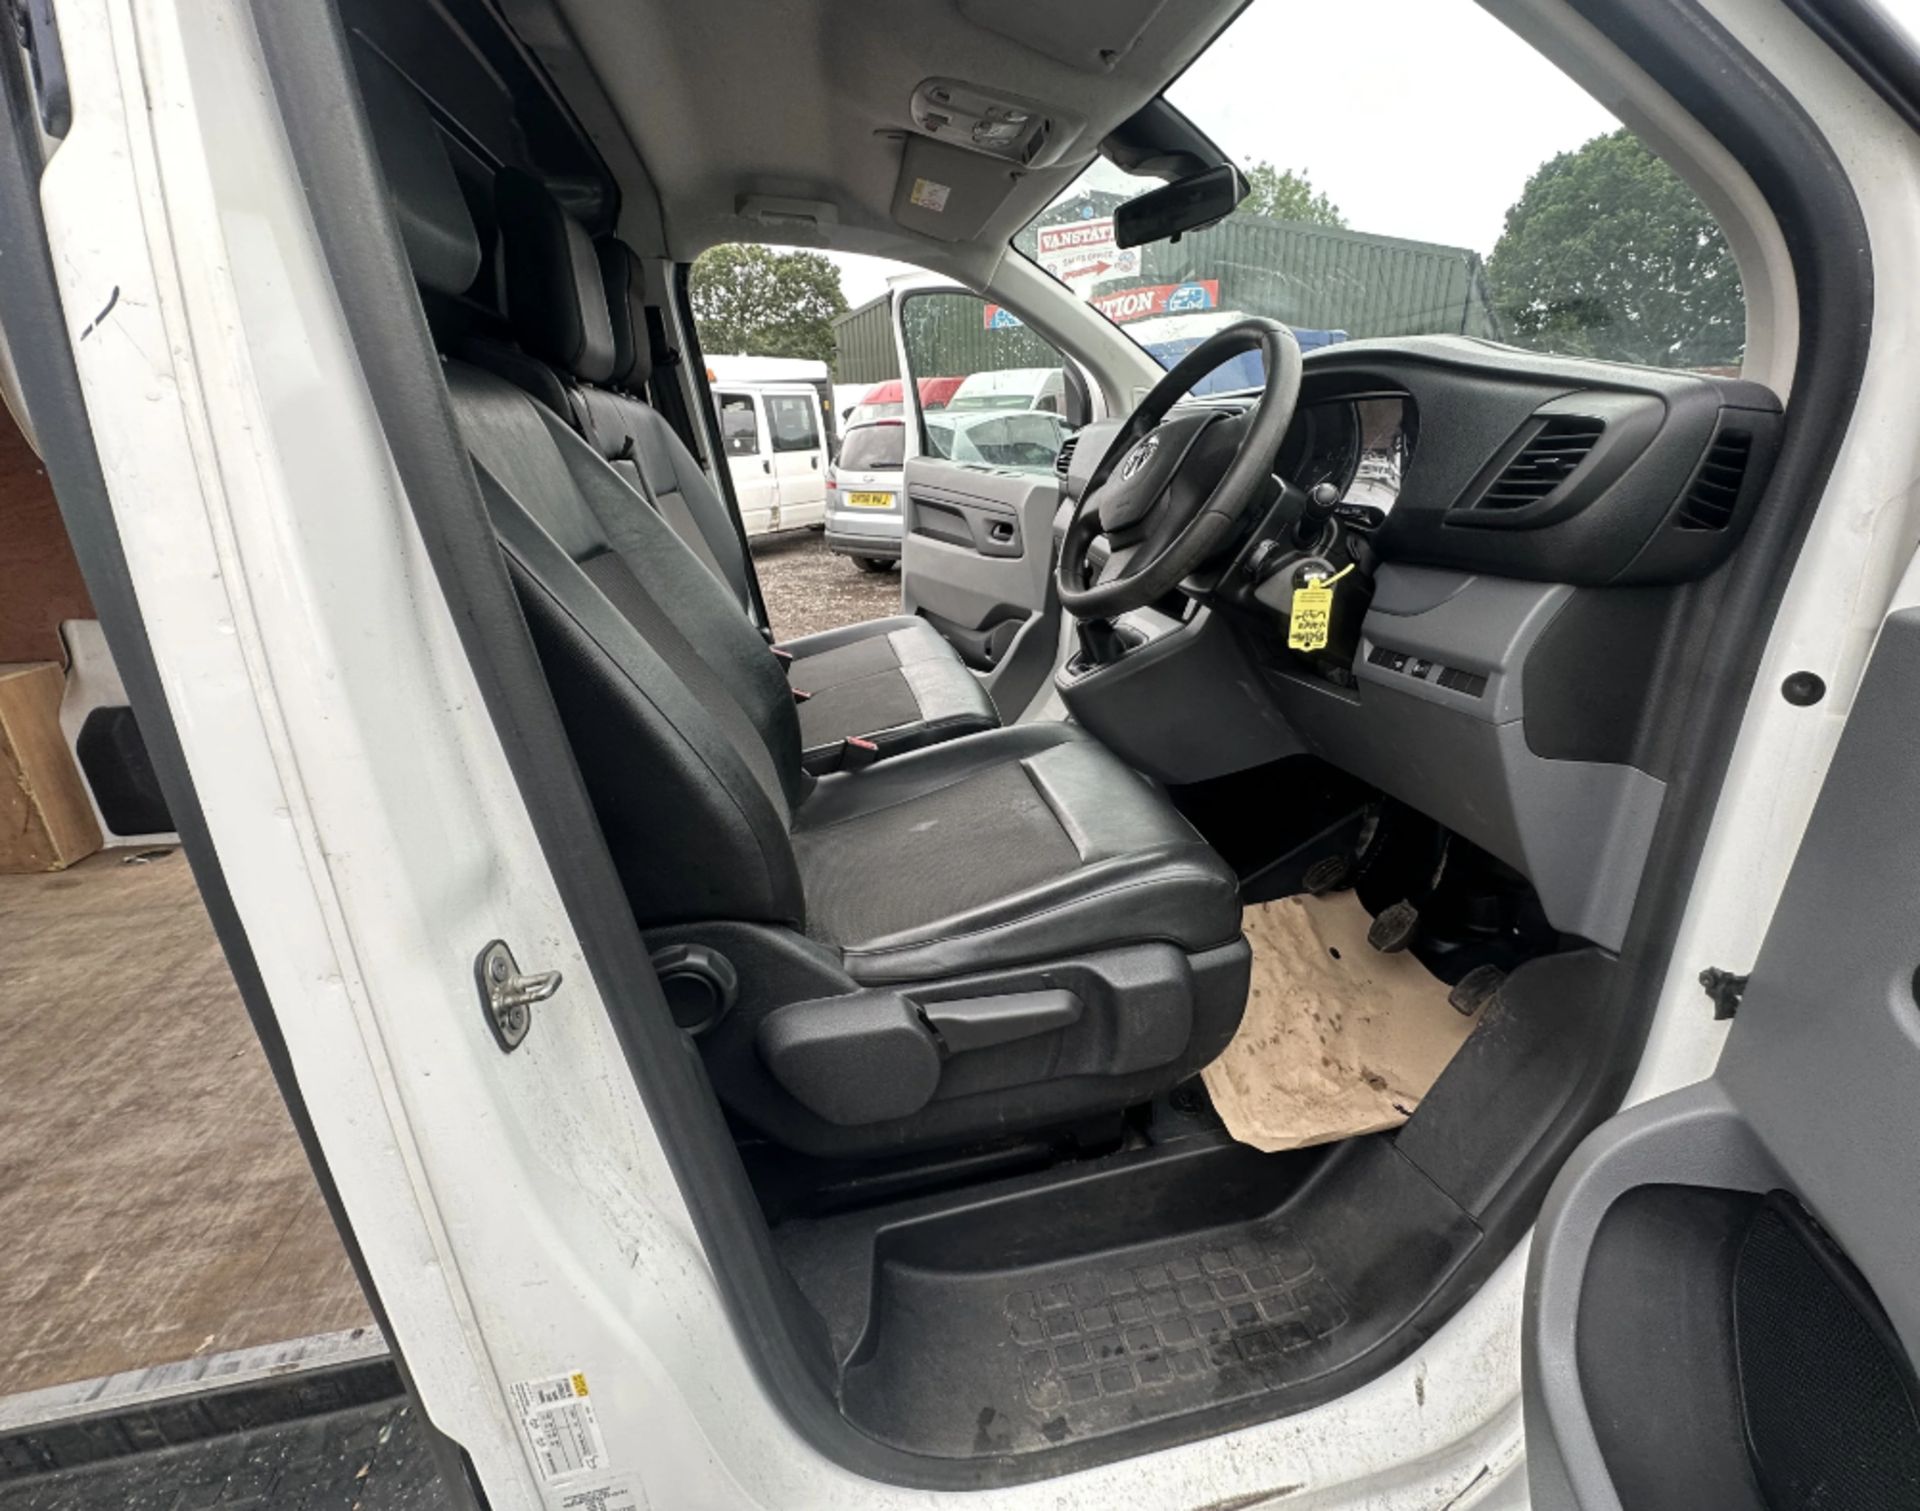 LOW-MILEAGE ONLY 70K MILES - 2019 VIVARO L2 DIESEL: READY TO ROLL - Image 6 of 11